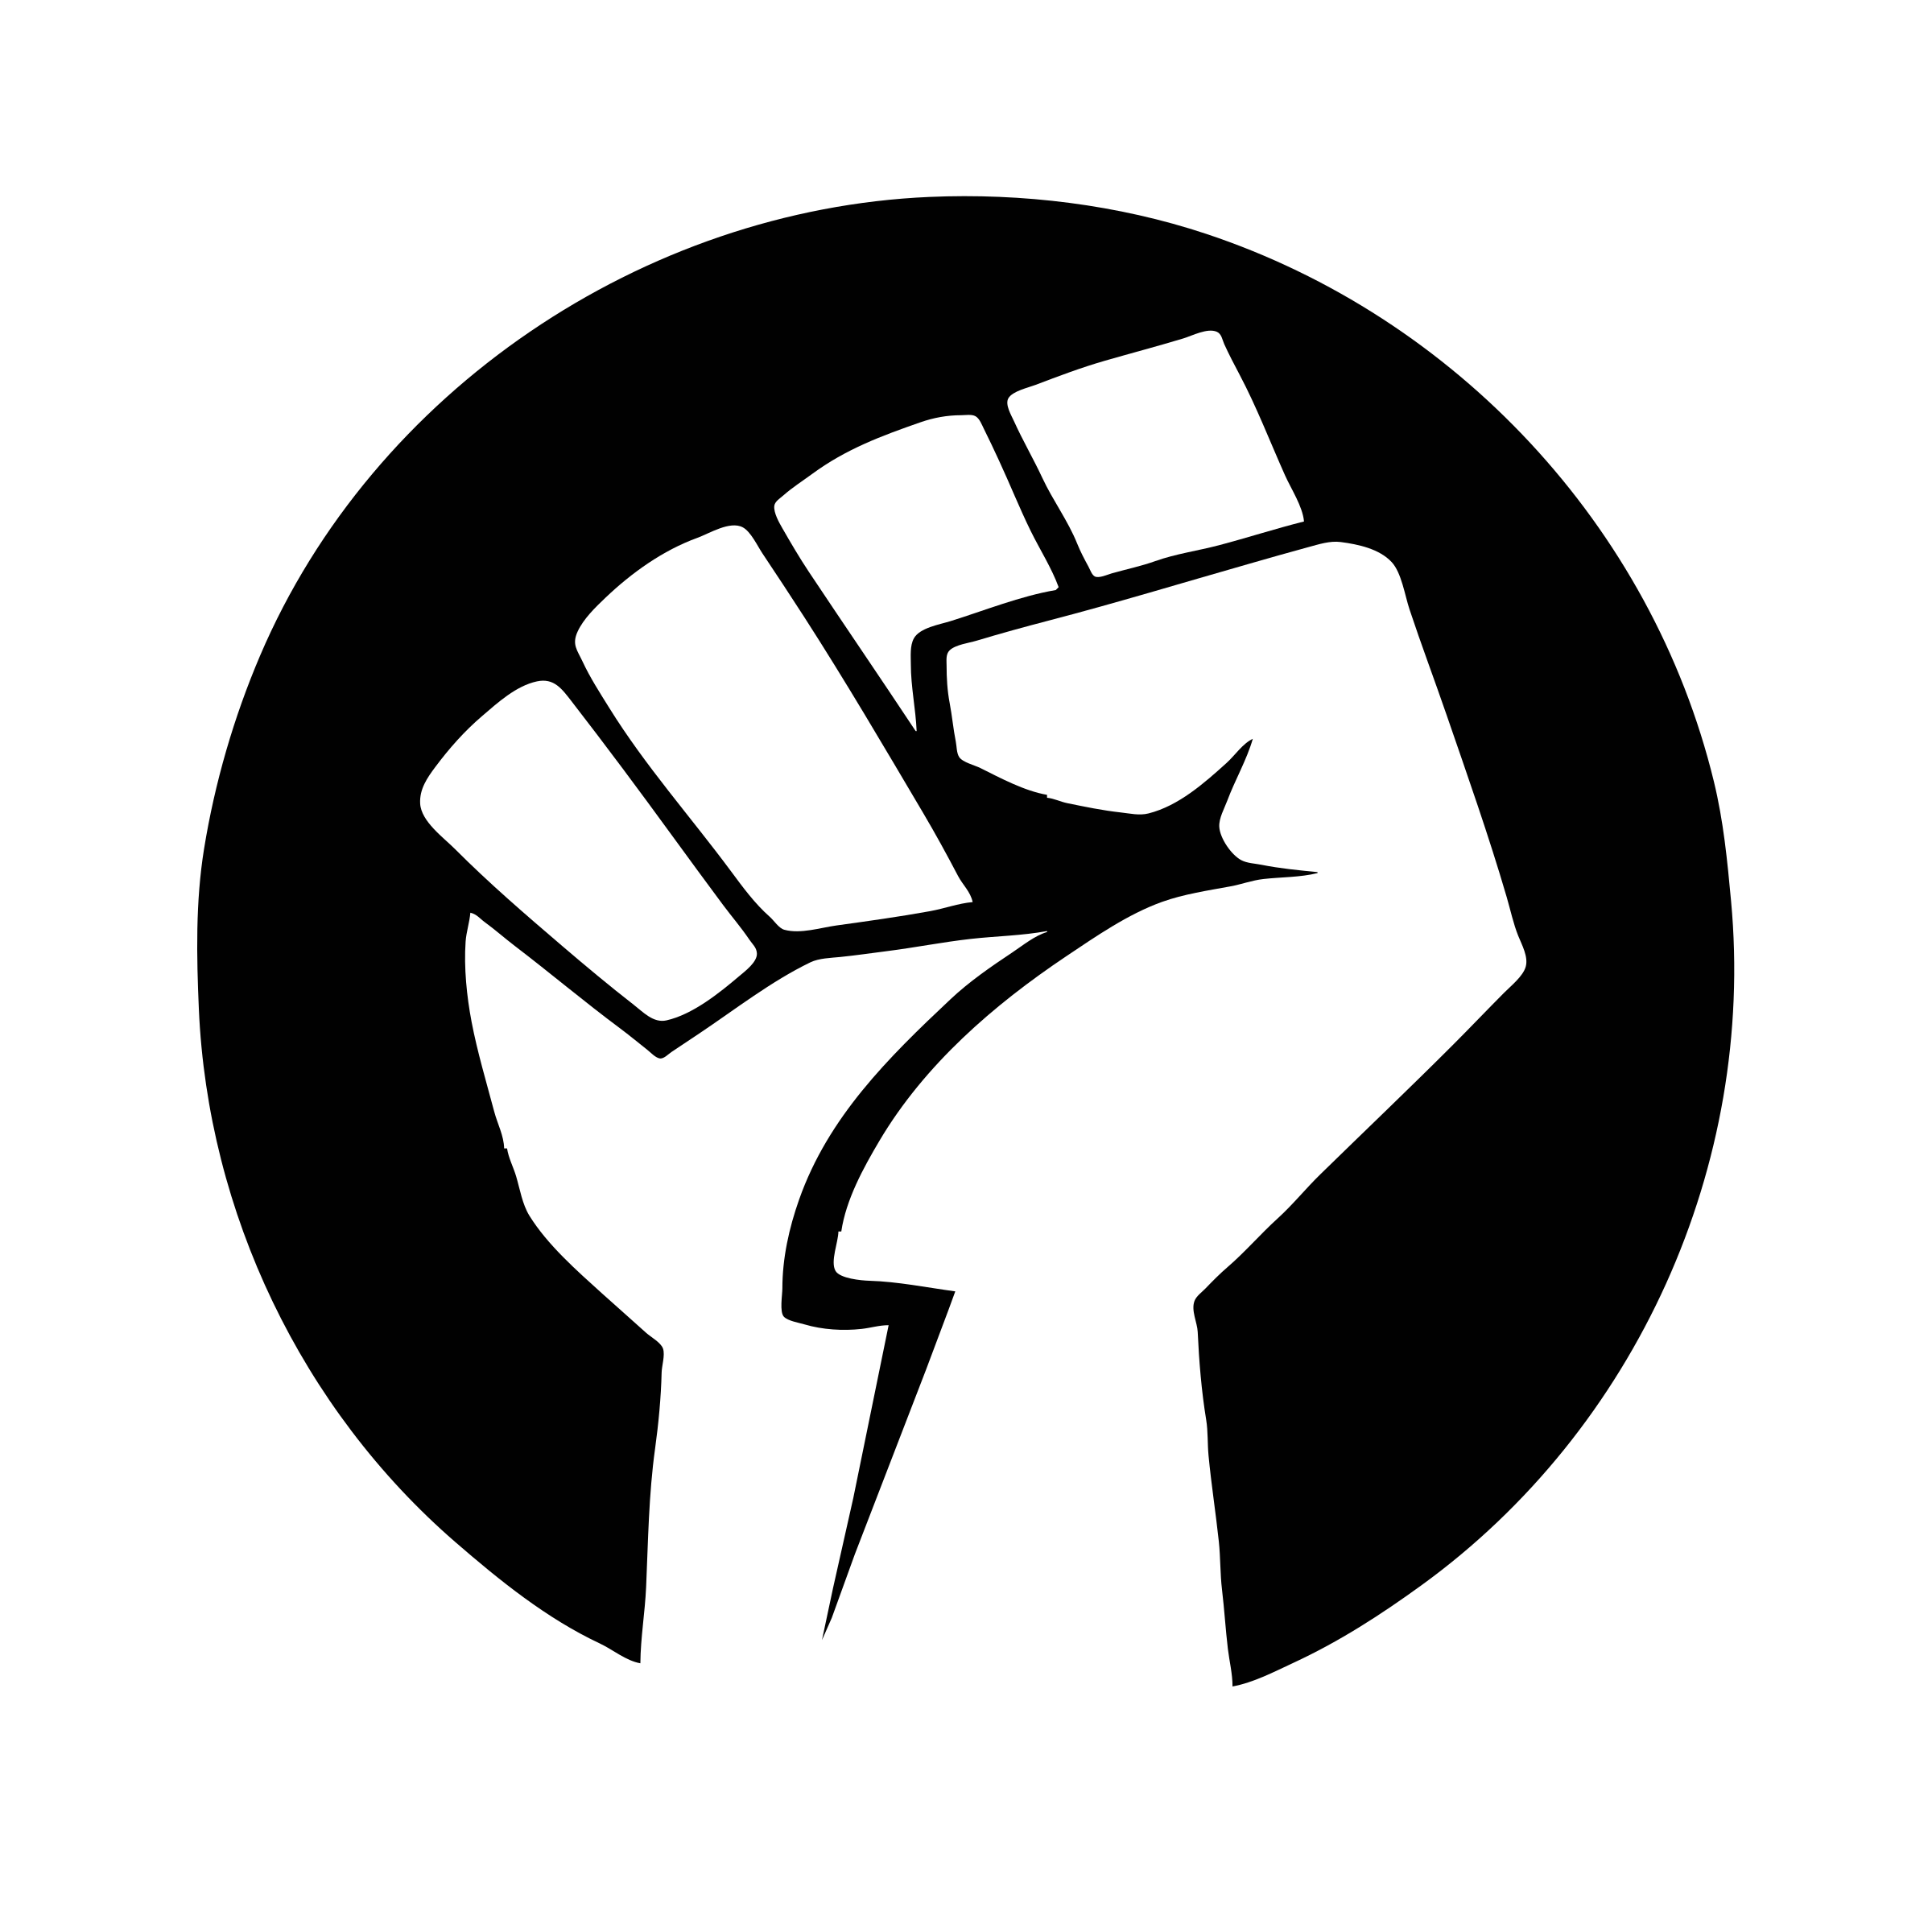 Fist clipart black and white